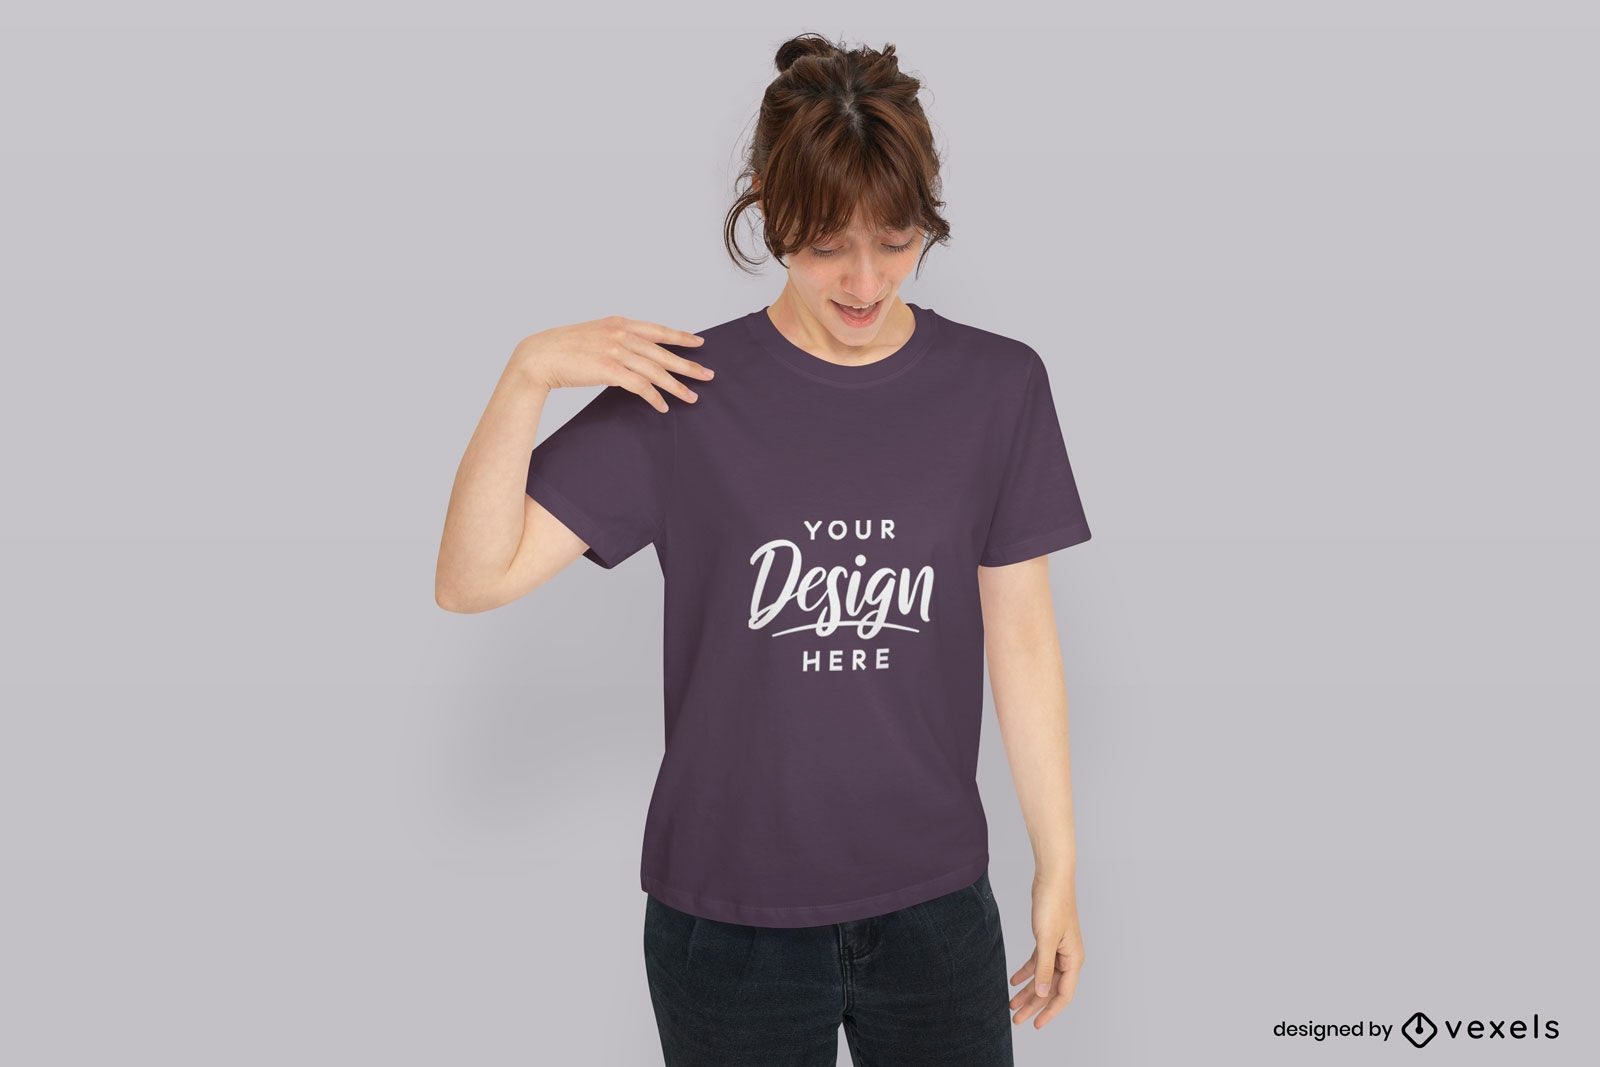 Girl with brown hair and t-shirt mockup